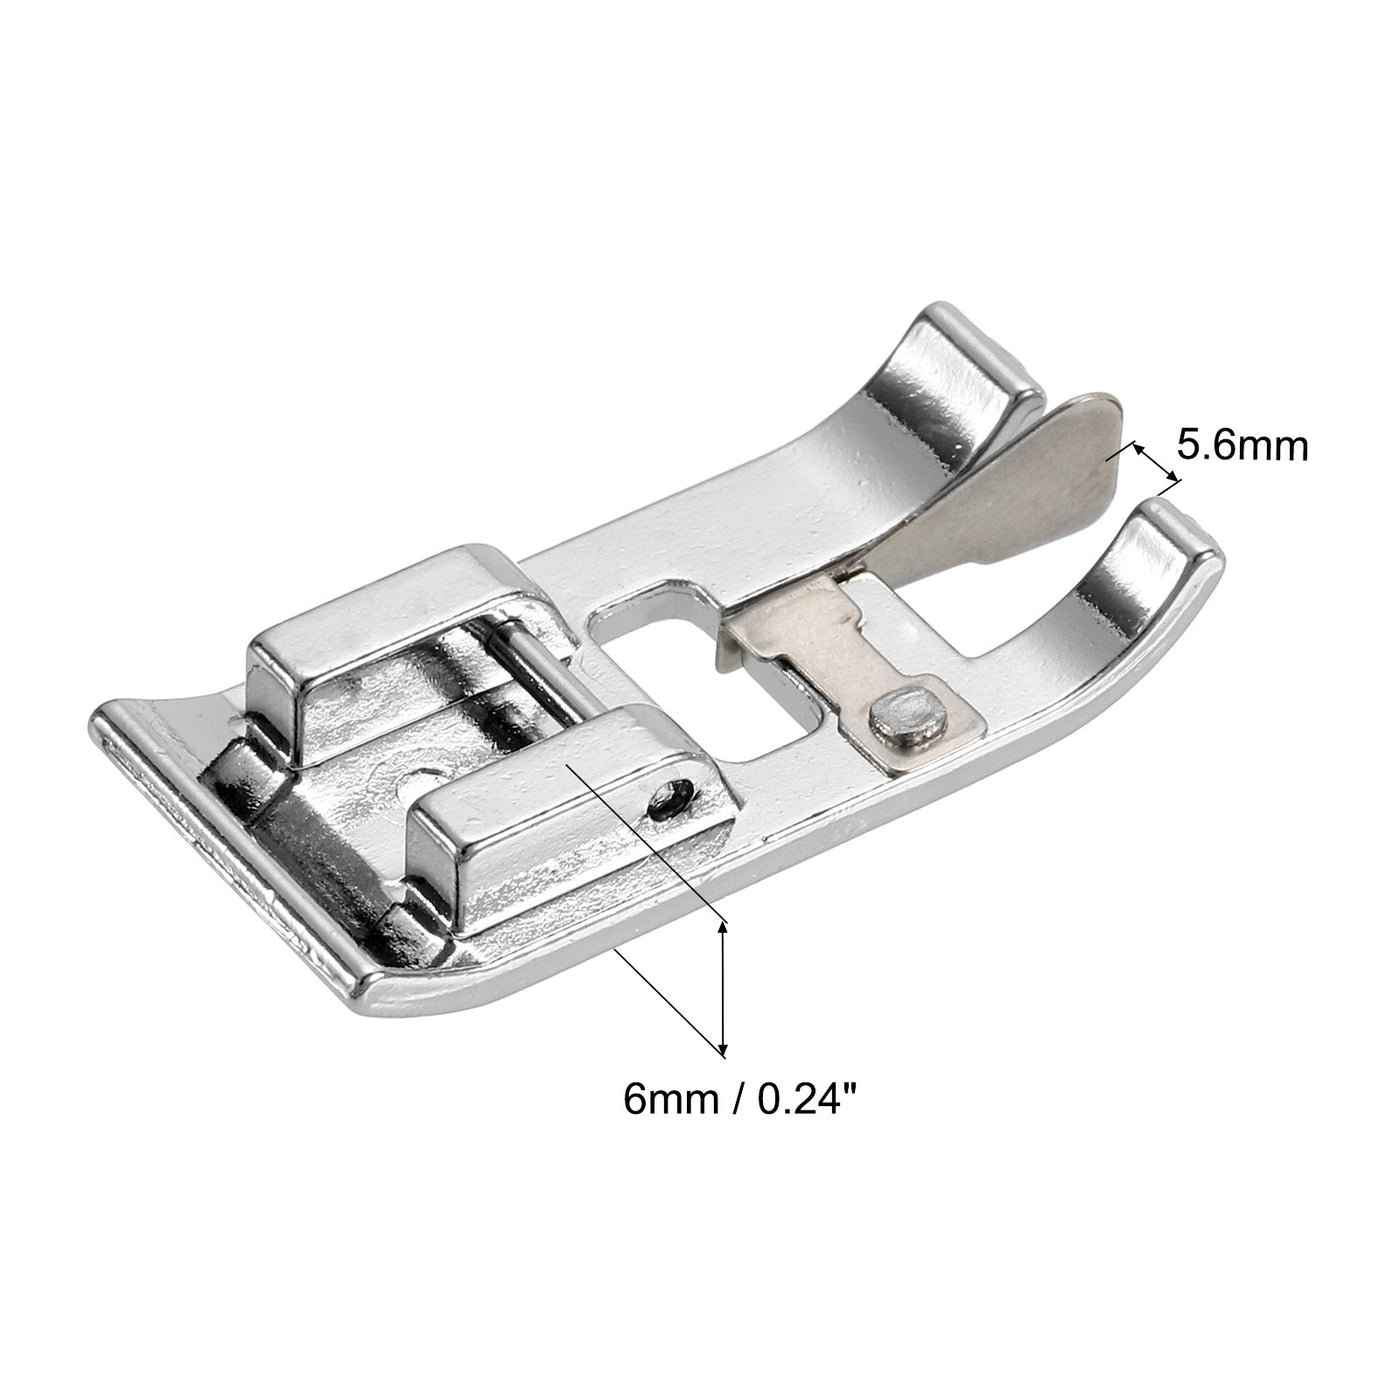 uxcell Uxcell Overcast Foot Sewing Machine Foot Galvanized Iron Presser Foot 36x16mm